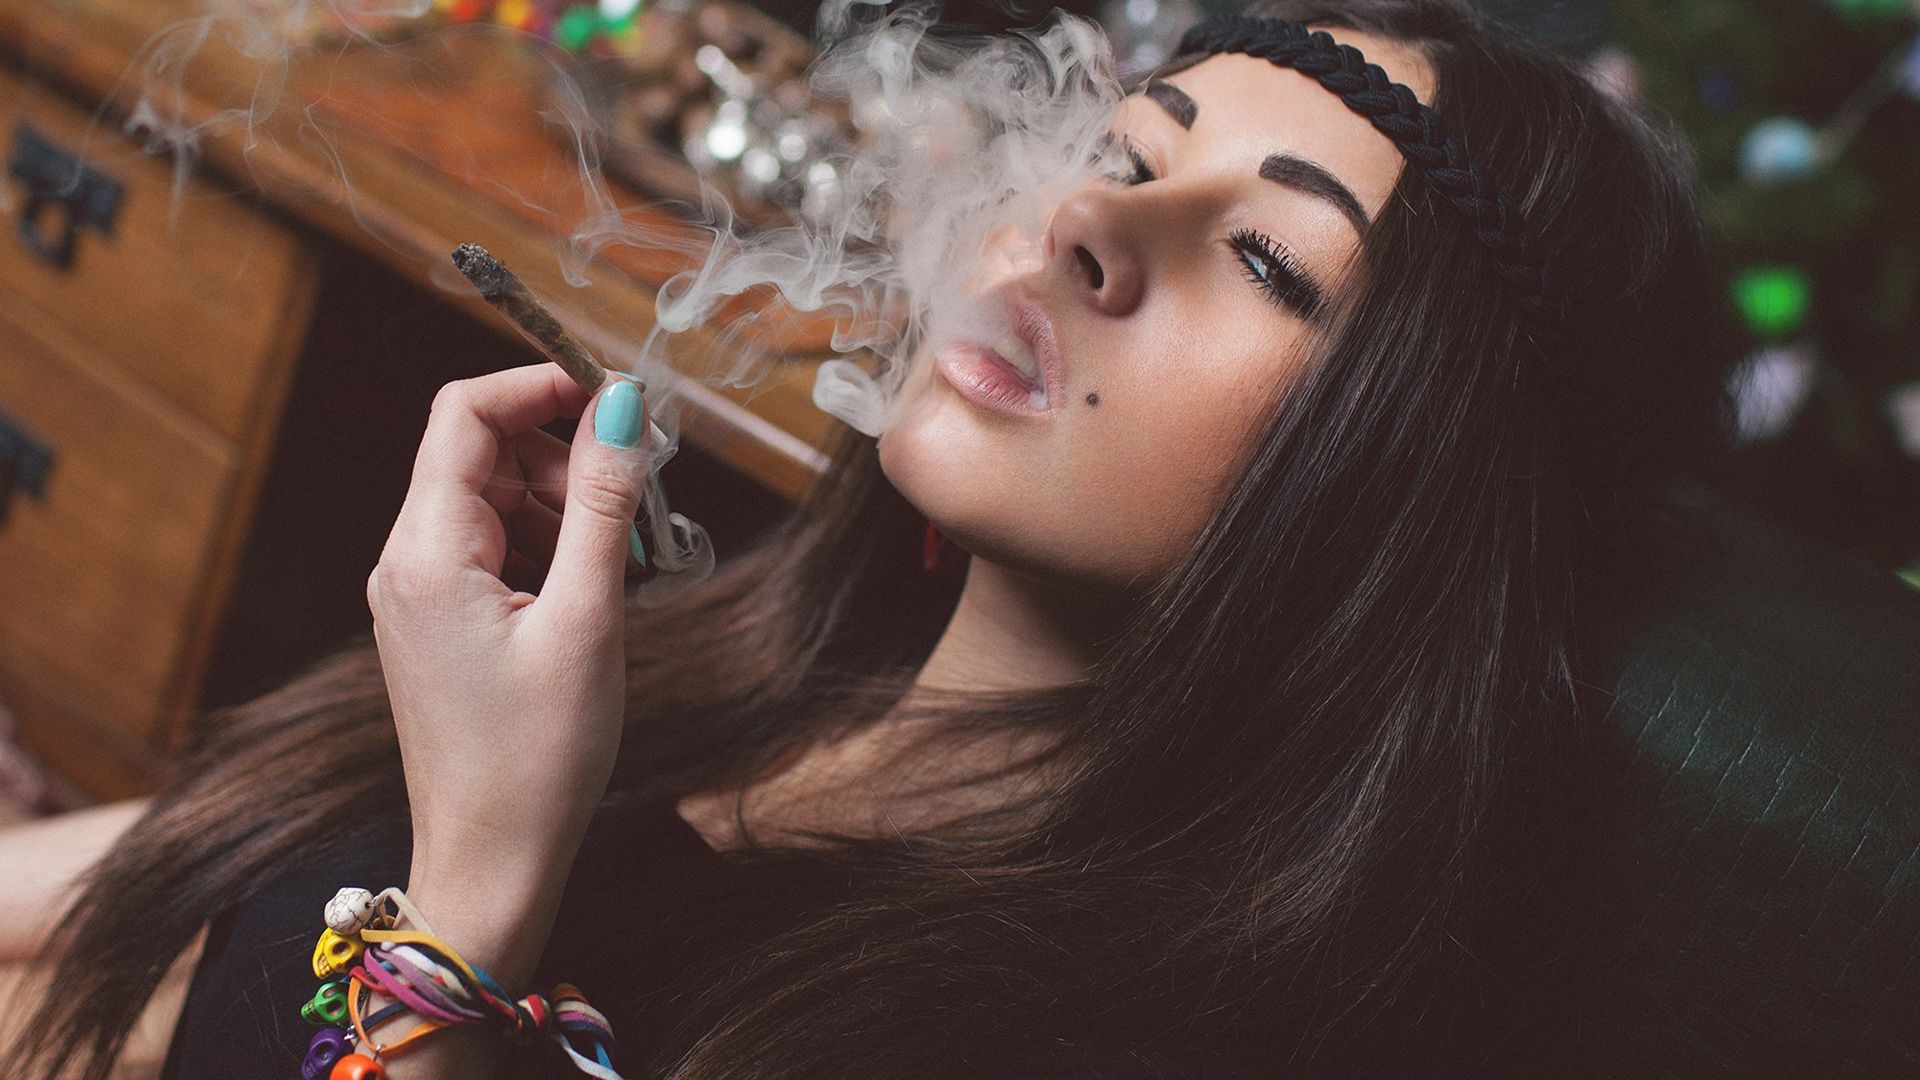 Weed And Girls Wallpapers posted by Ethan Peltier.